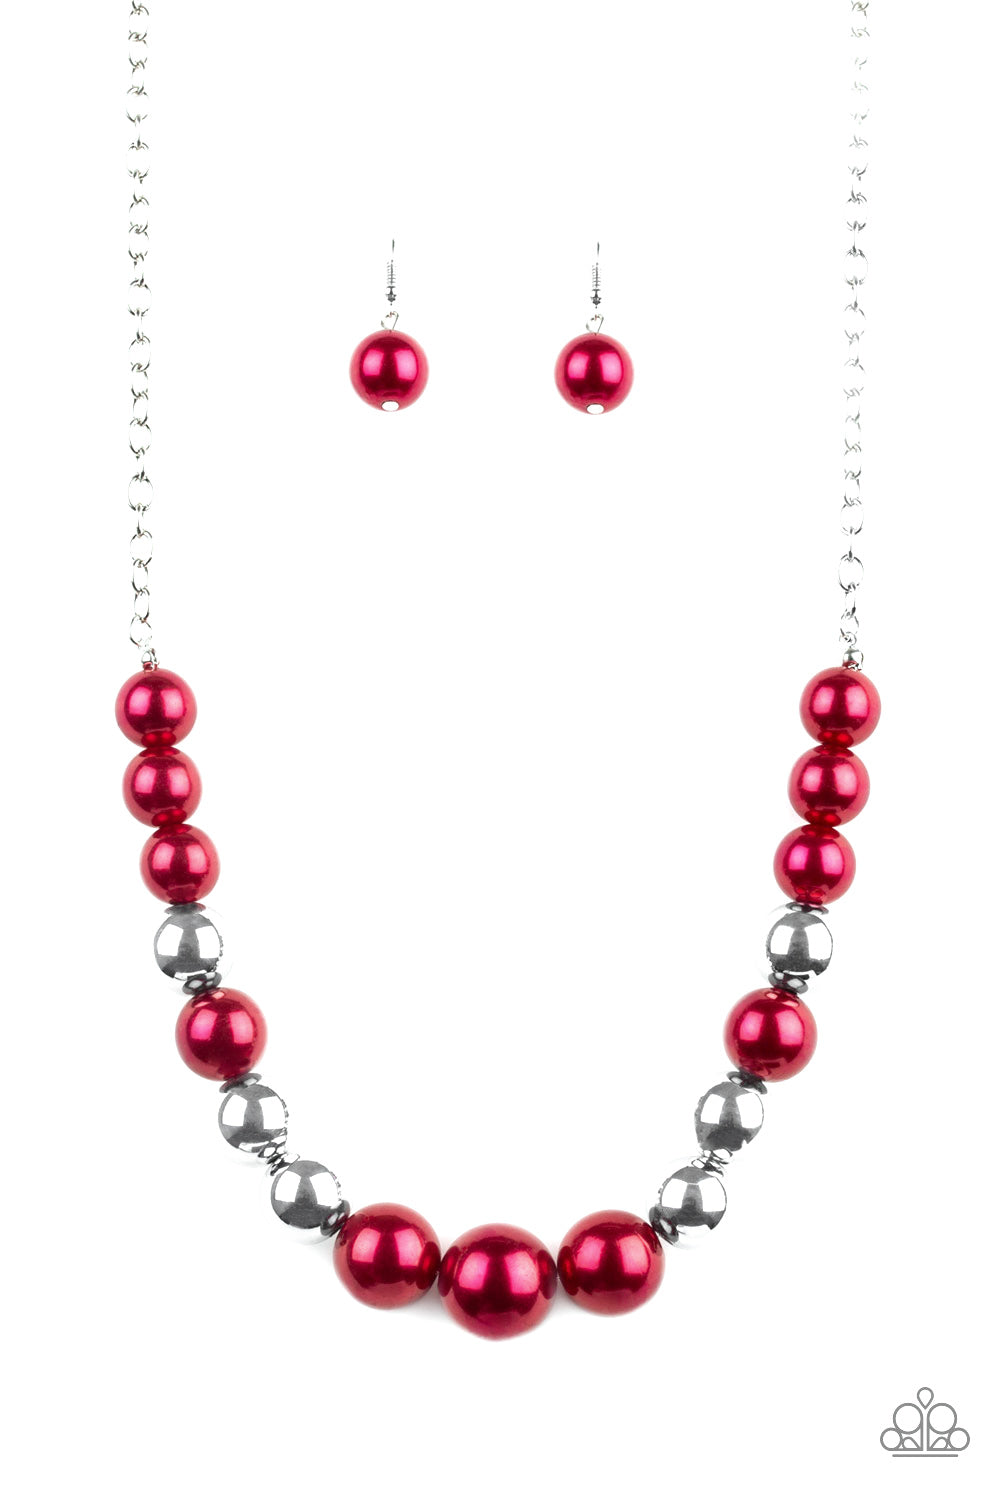 Paparazzi Take Note - Red Pearl & Silver Necklace - Aliesblingbar